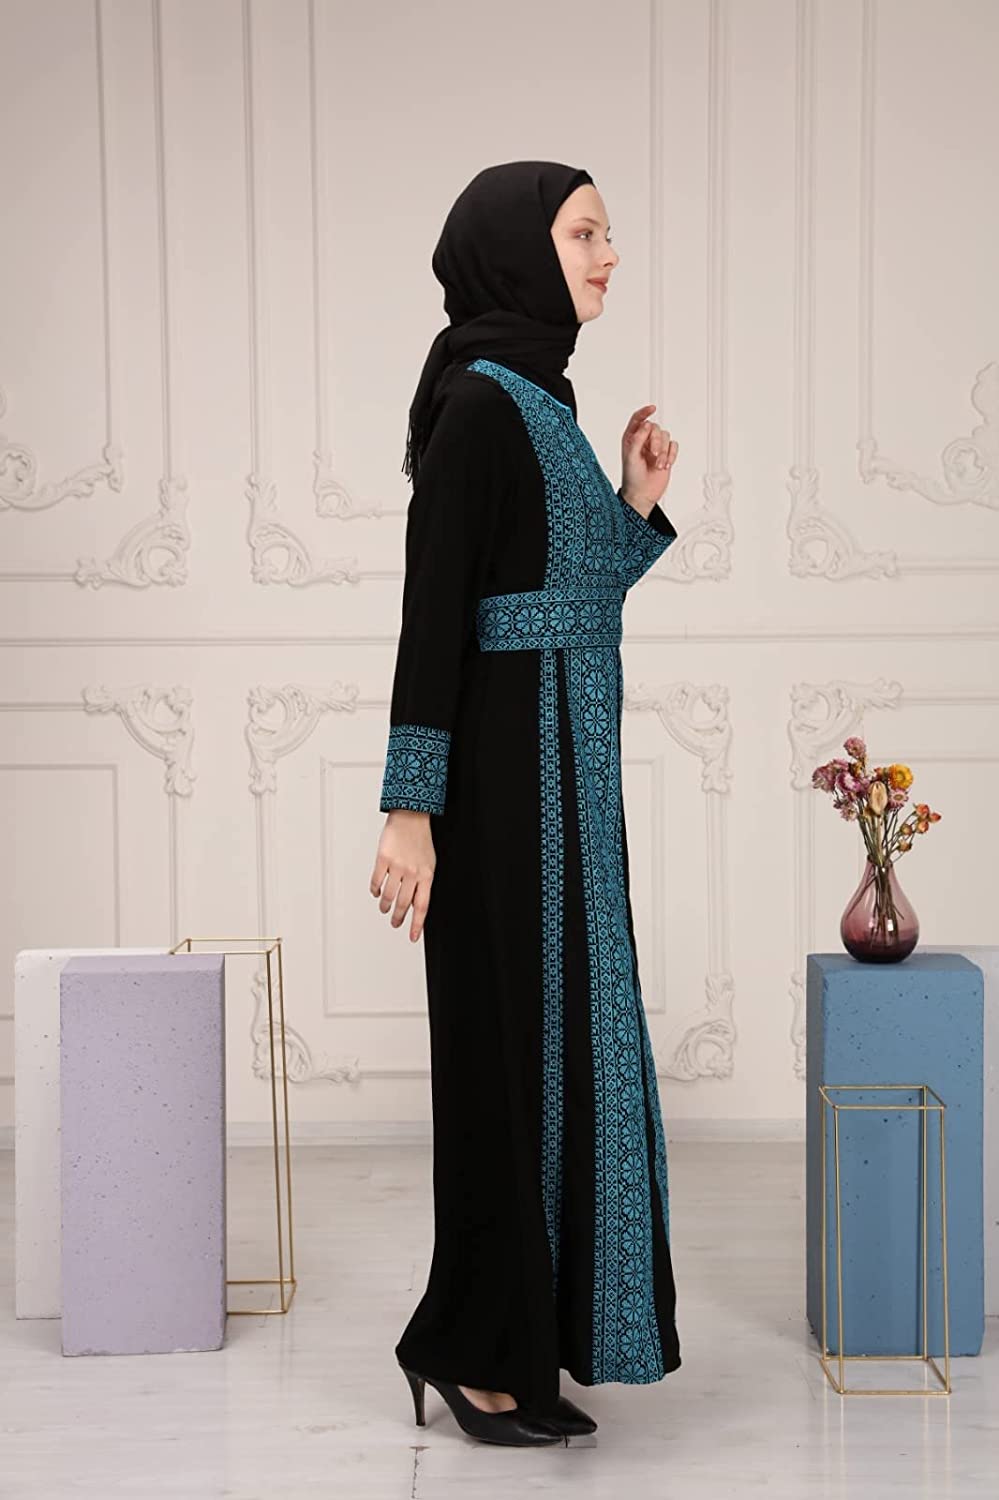 Marwa Fashion Thobe Dress for Women with Traditional Palestinian Embroidery - Islamic Muslim Costume Wedding, Party & Dinner Black Blue